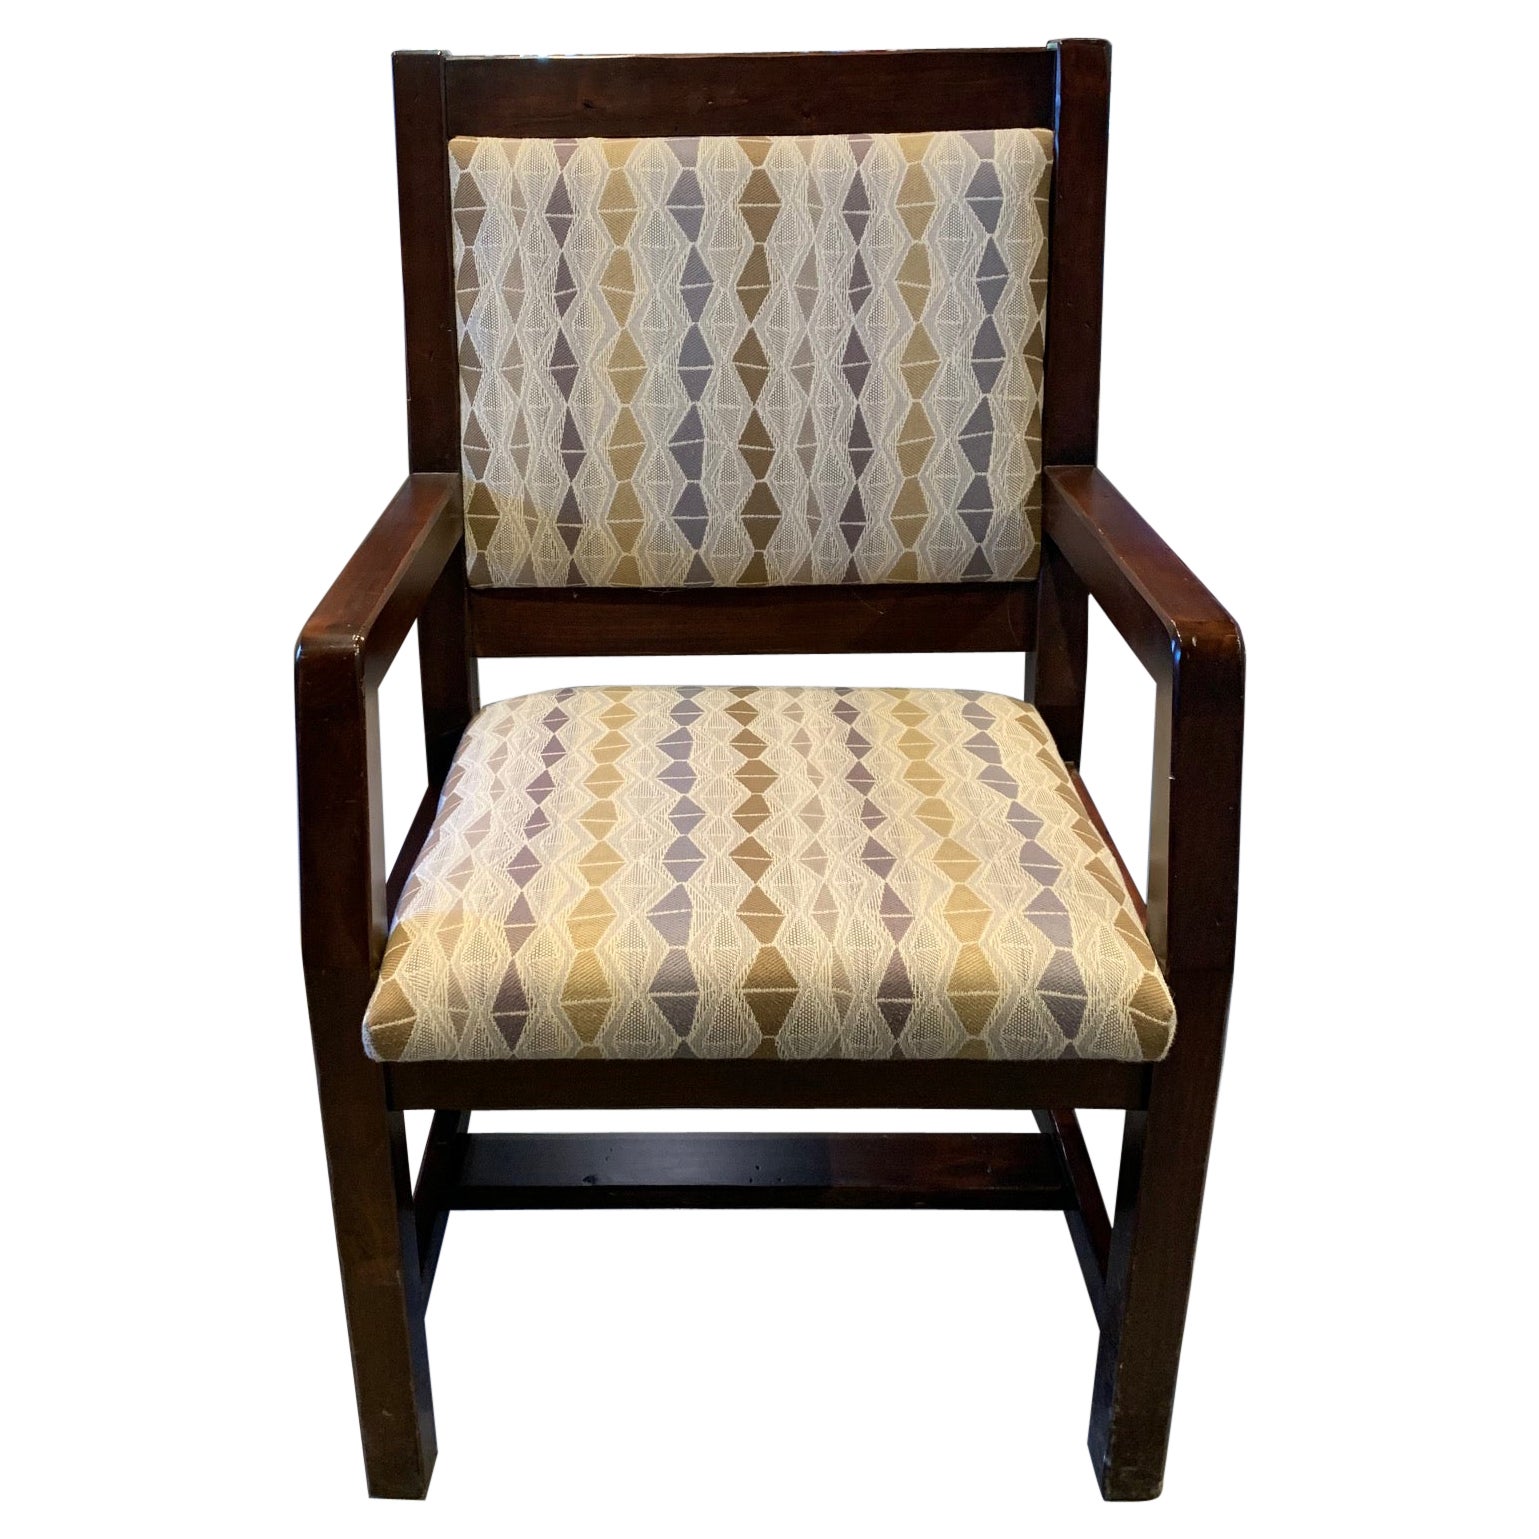 Reception Arm Chair For Sale